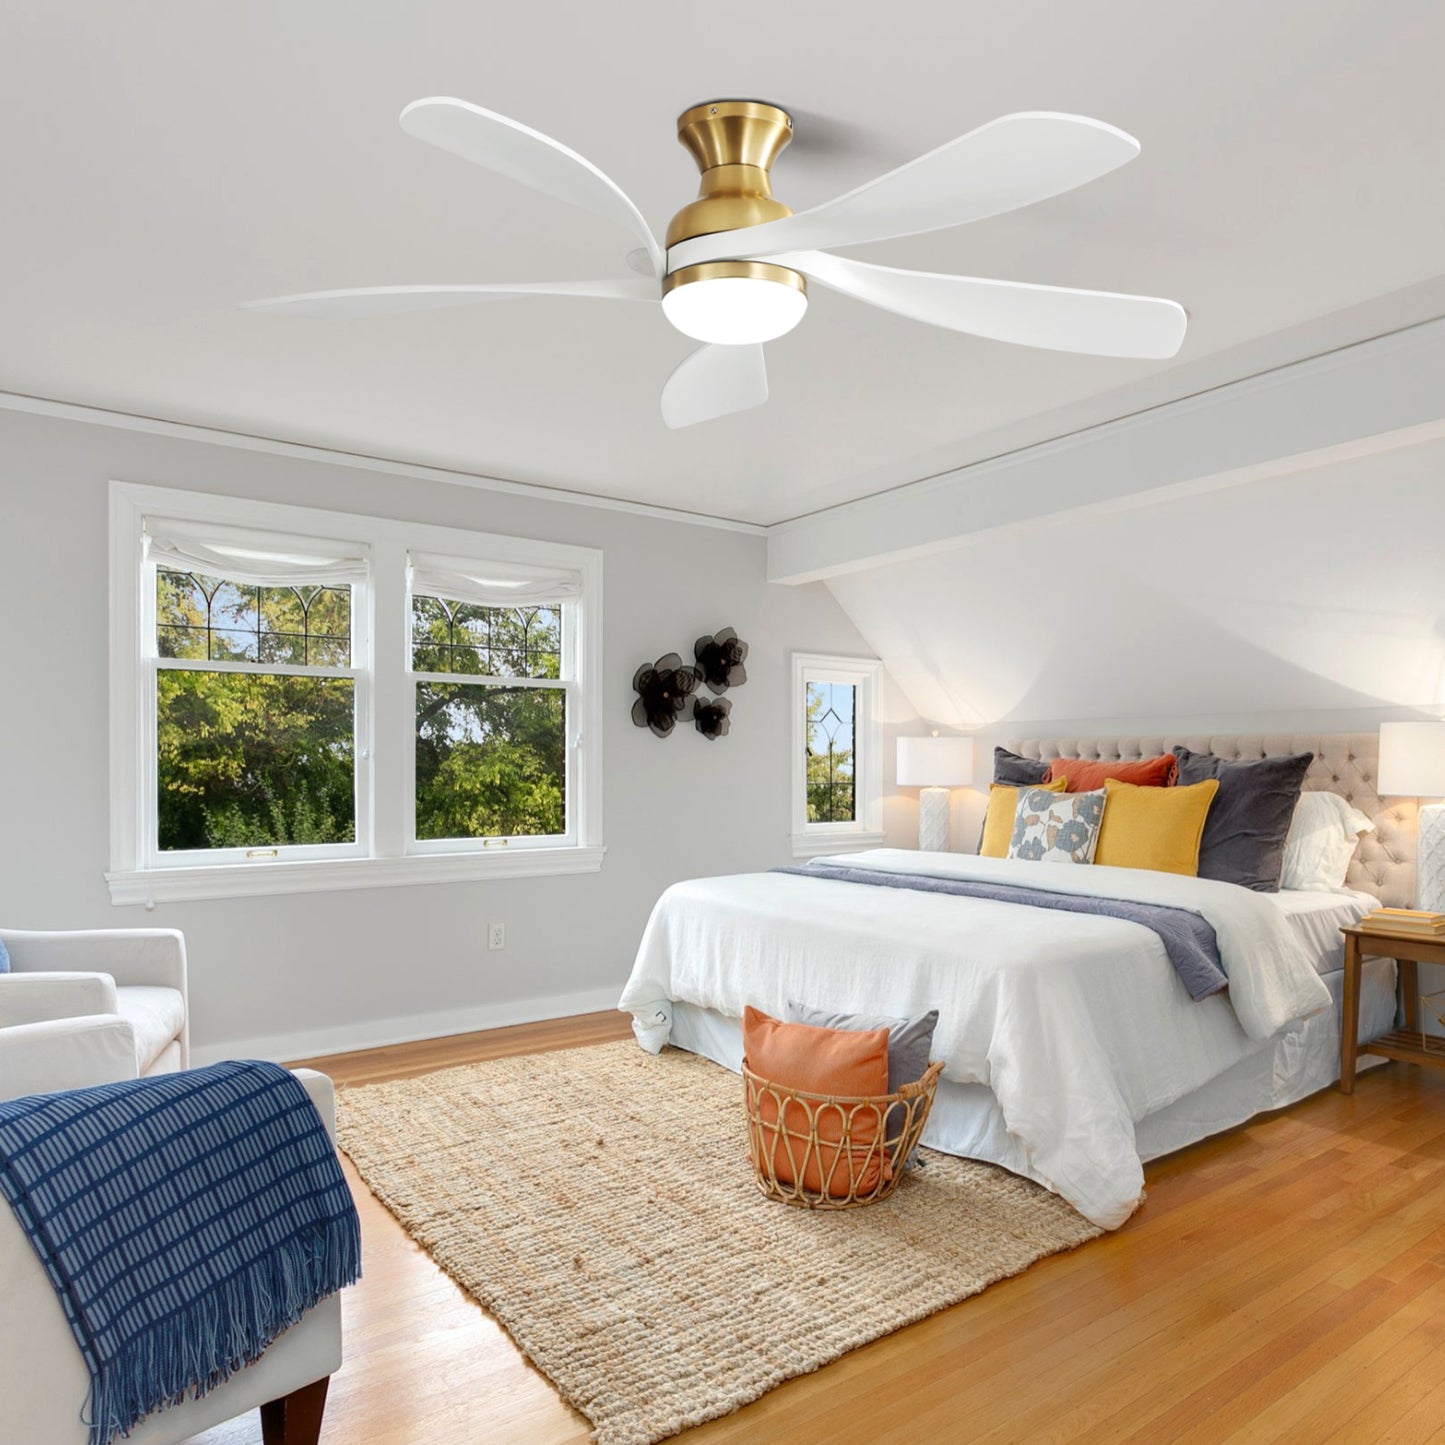 52 Modern Ceiling Fan with Dimmable LED Light and Reversible DC Motor